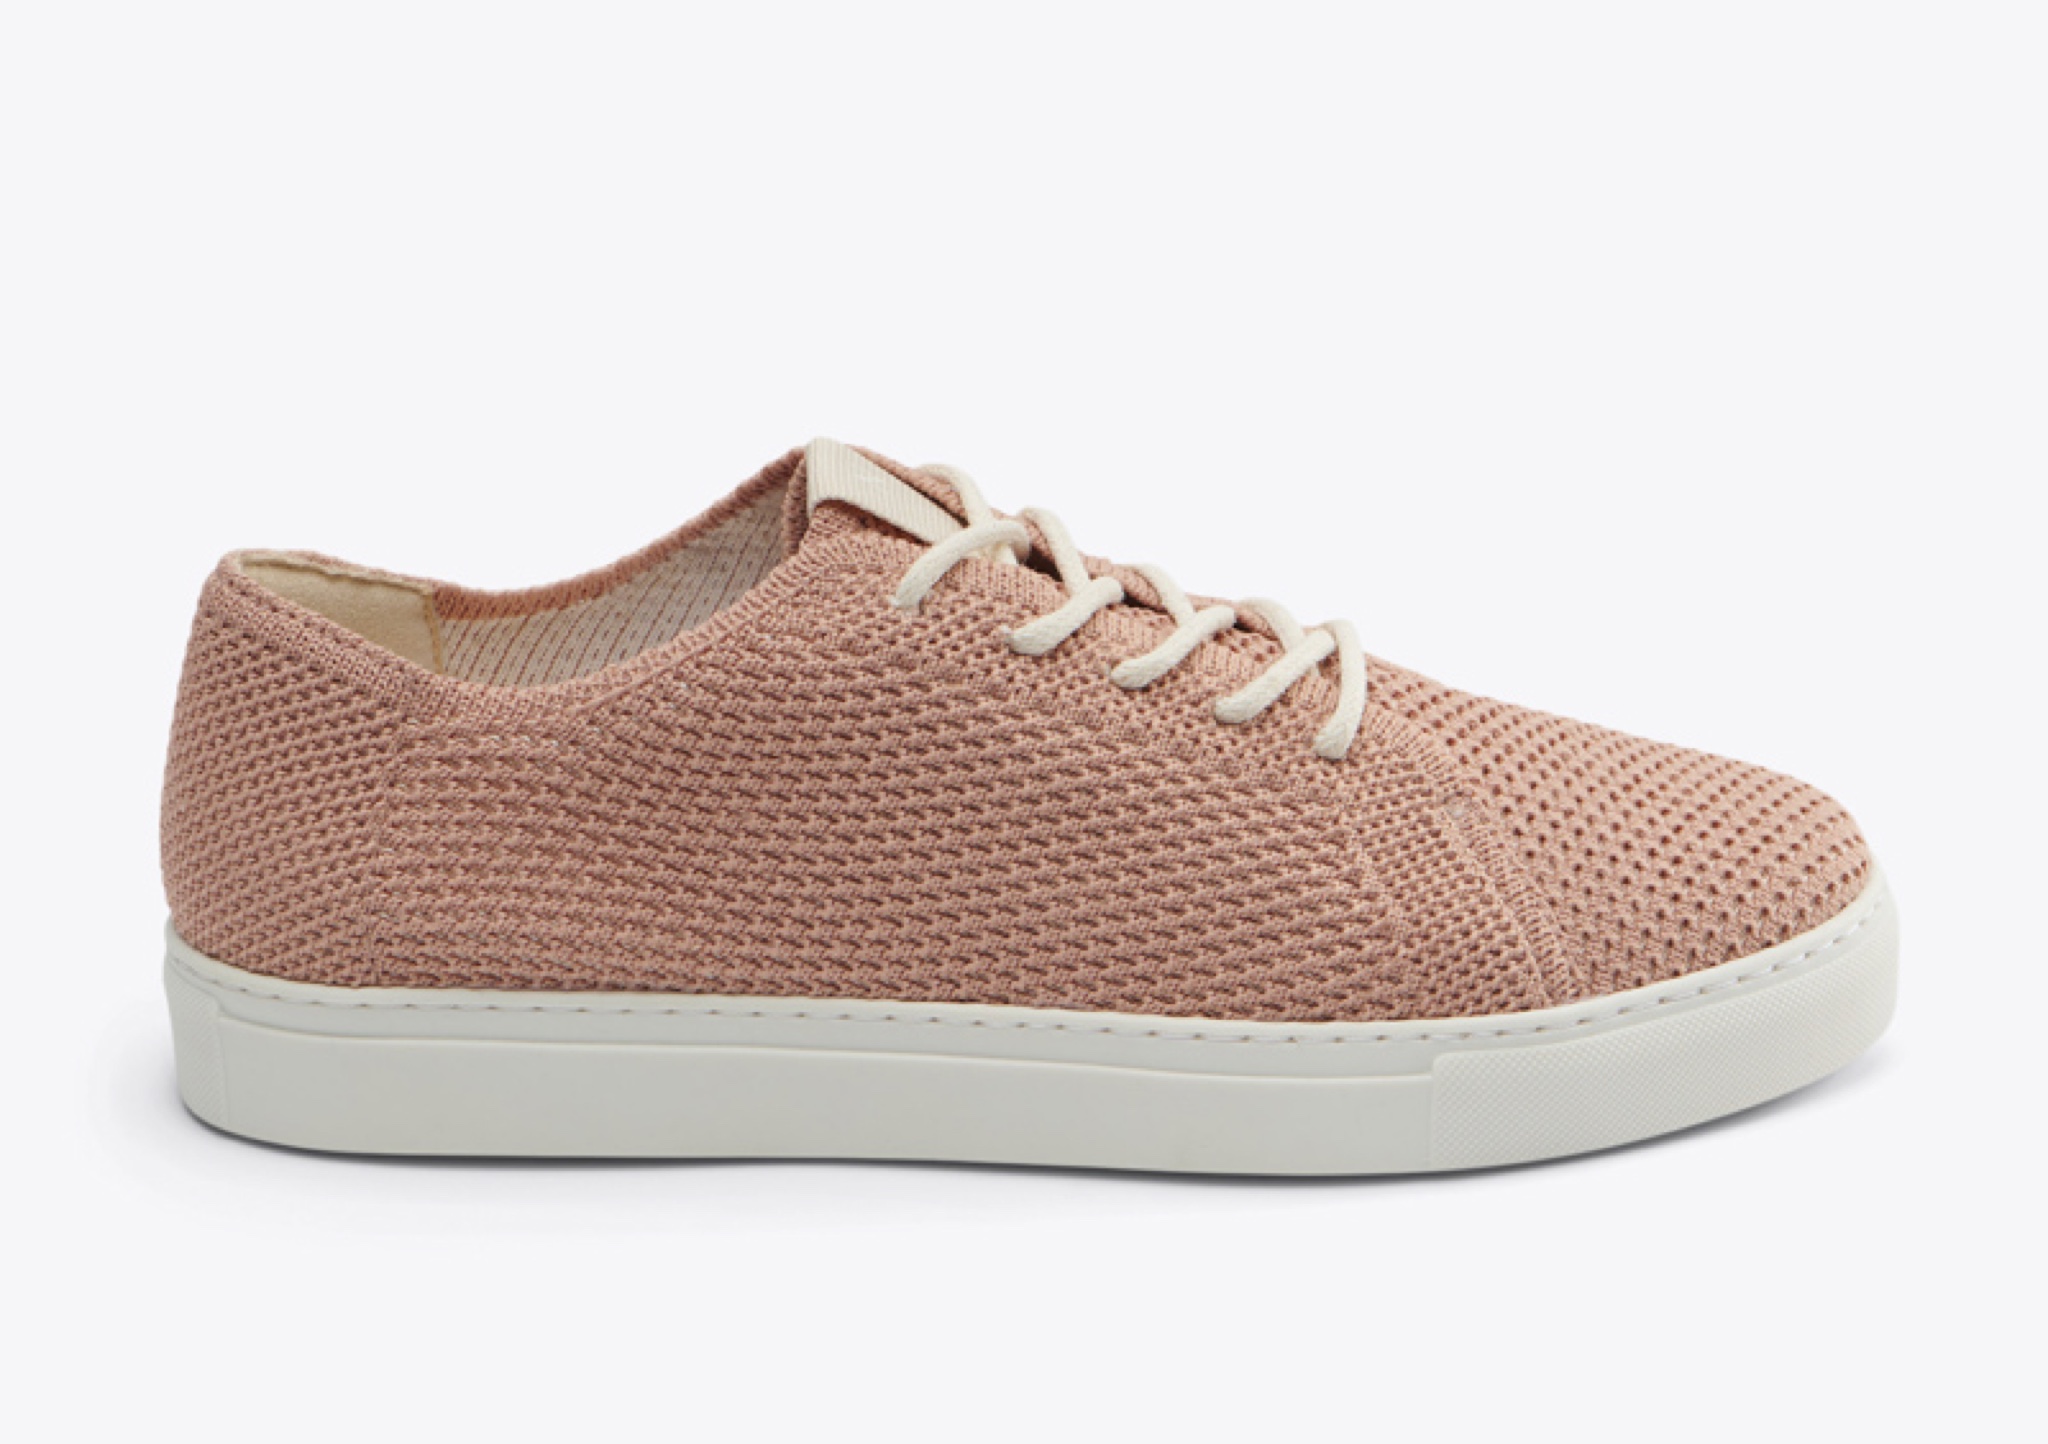 Nisolo Women's Go-To Eco-Knit Sneaker Dusty Rose - Every Nisolo product is built on the foundation of comfort, function, and design. 